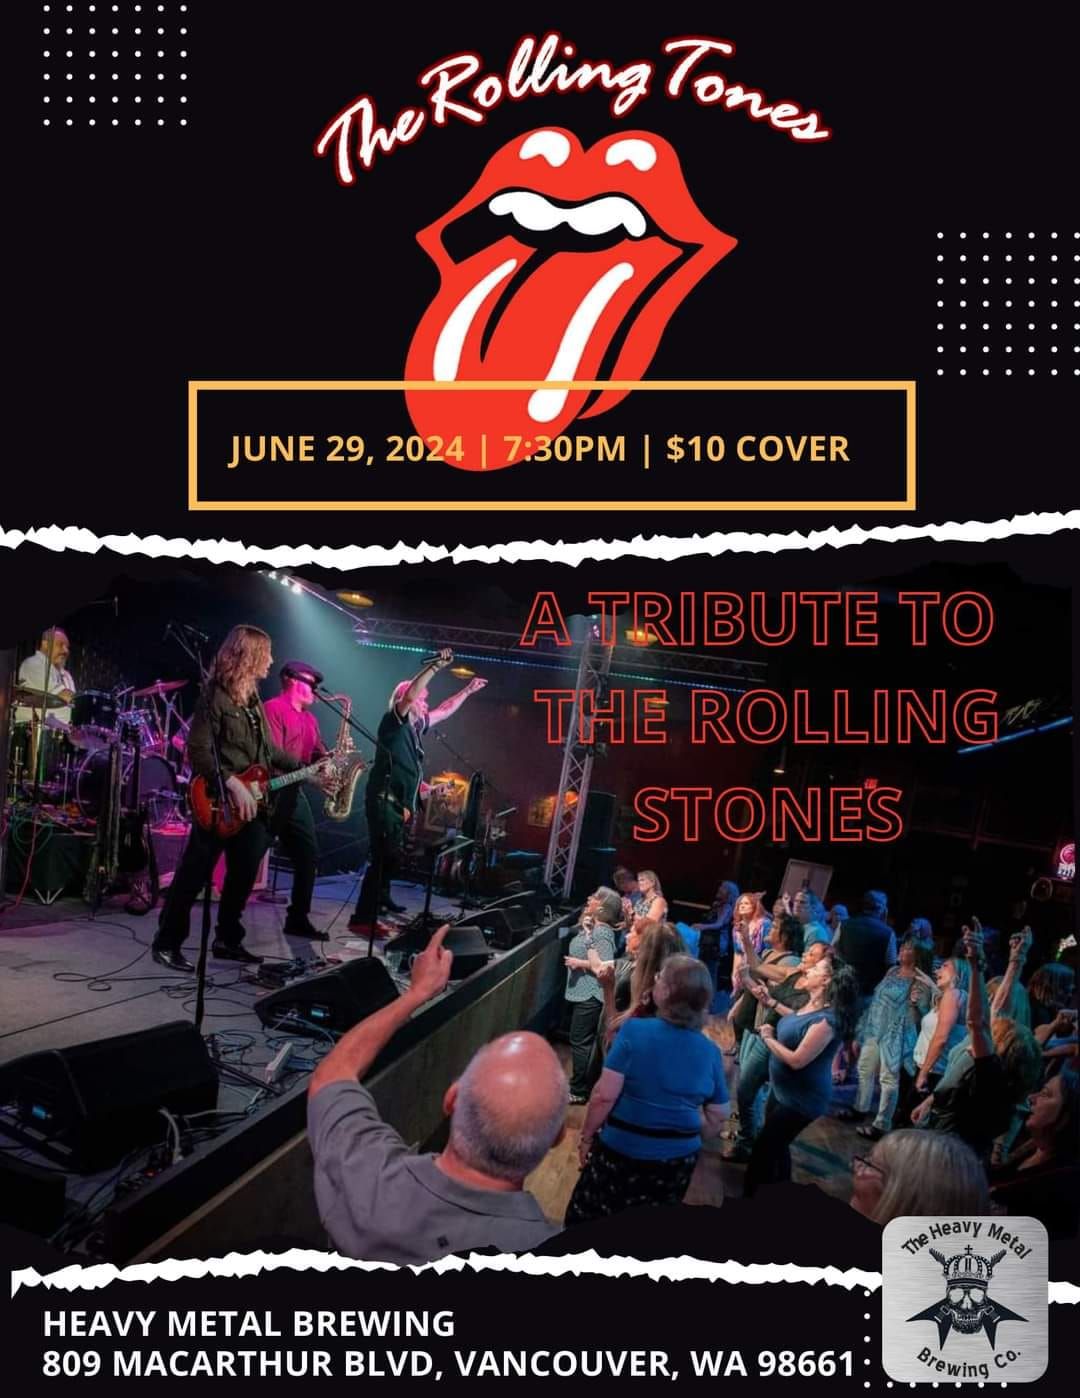 The Rolling Tones ( A Tribute to The Rolling Stones)